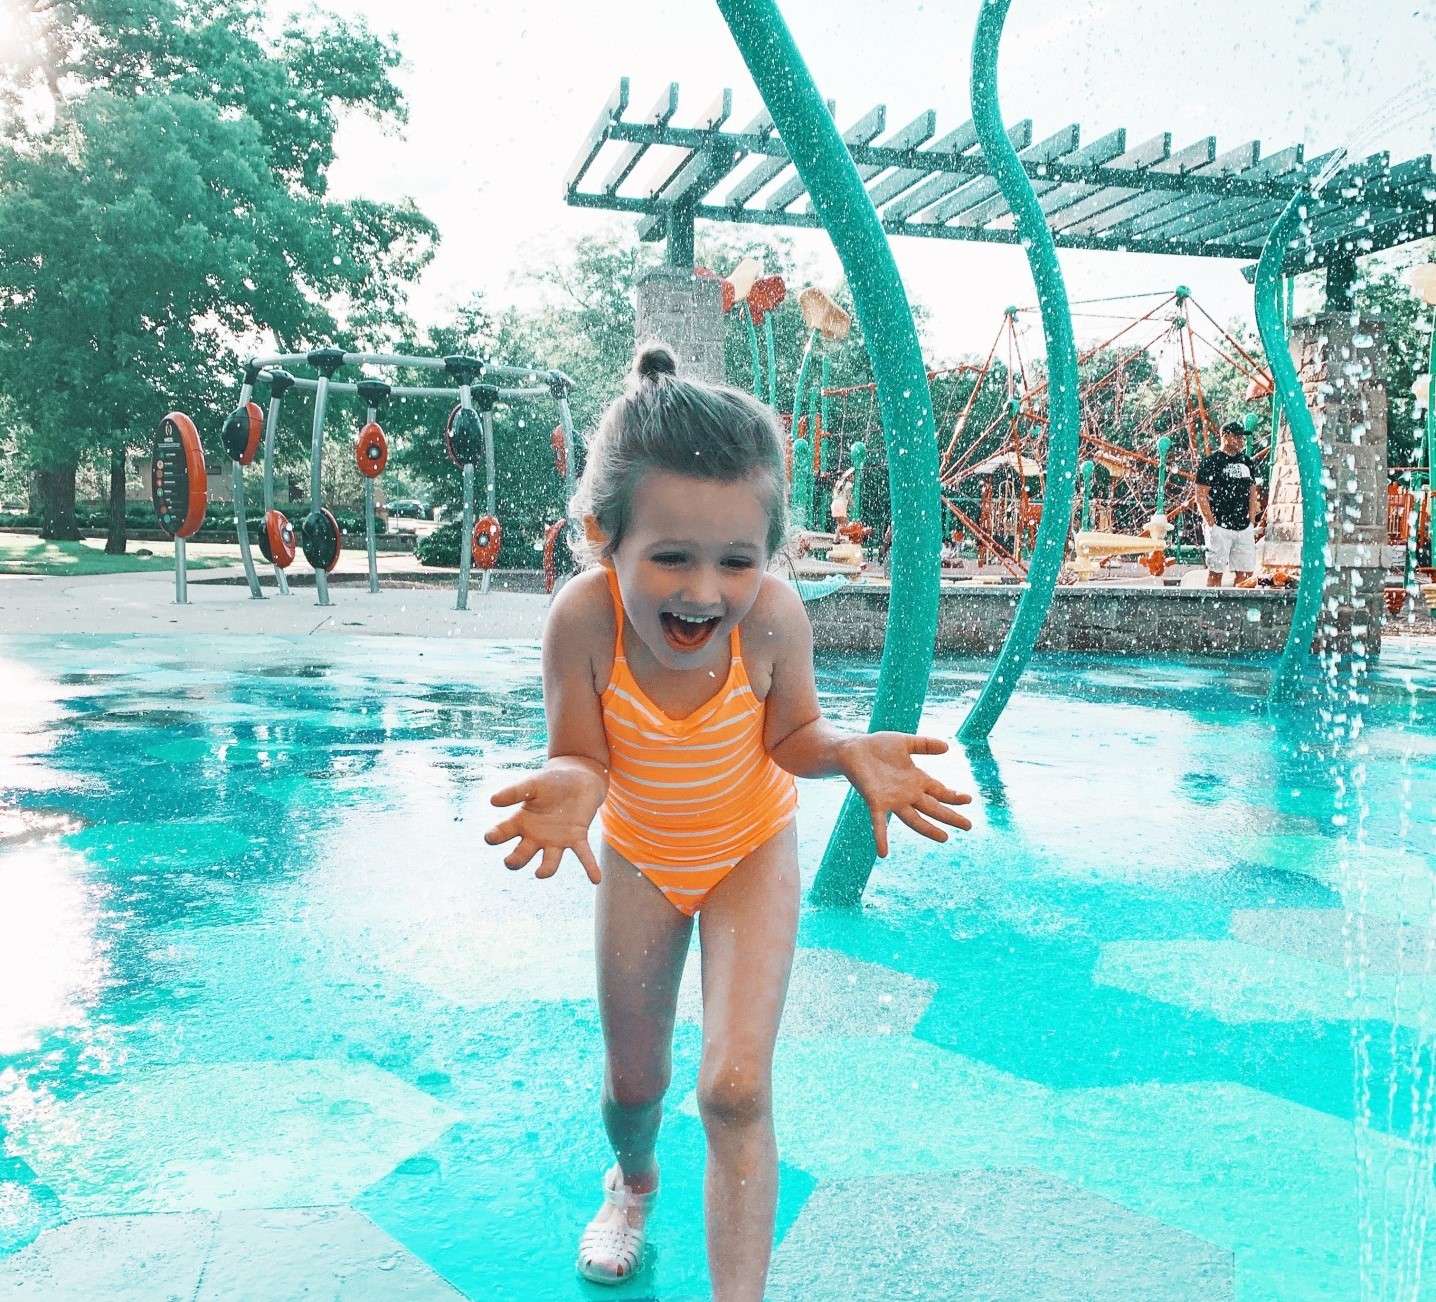 Little girl playing in waterpark.